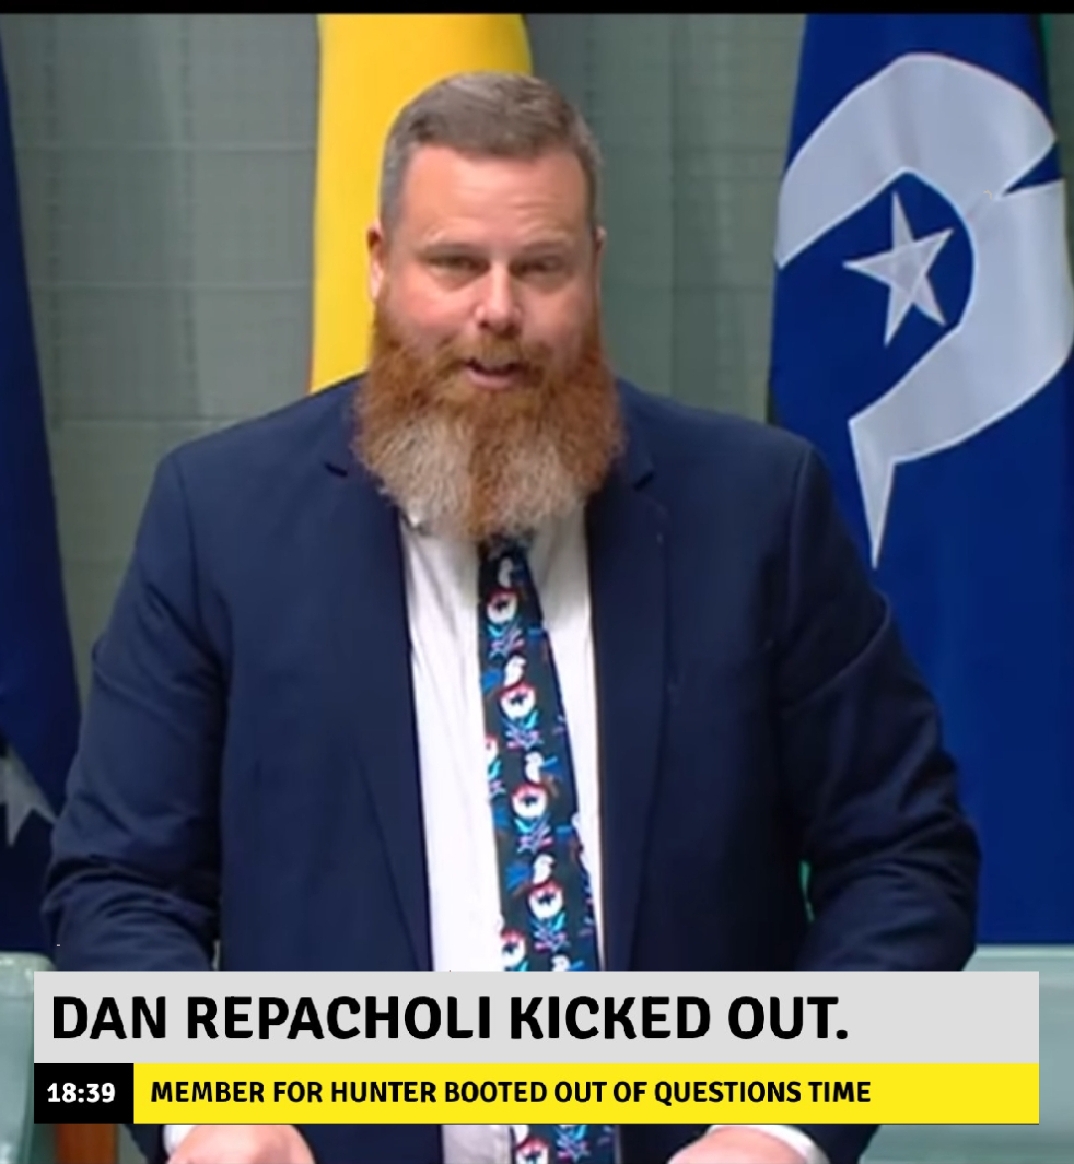 You are currently viewing Member for Hunter Dan Repacholi booted by the speaker of the house